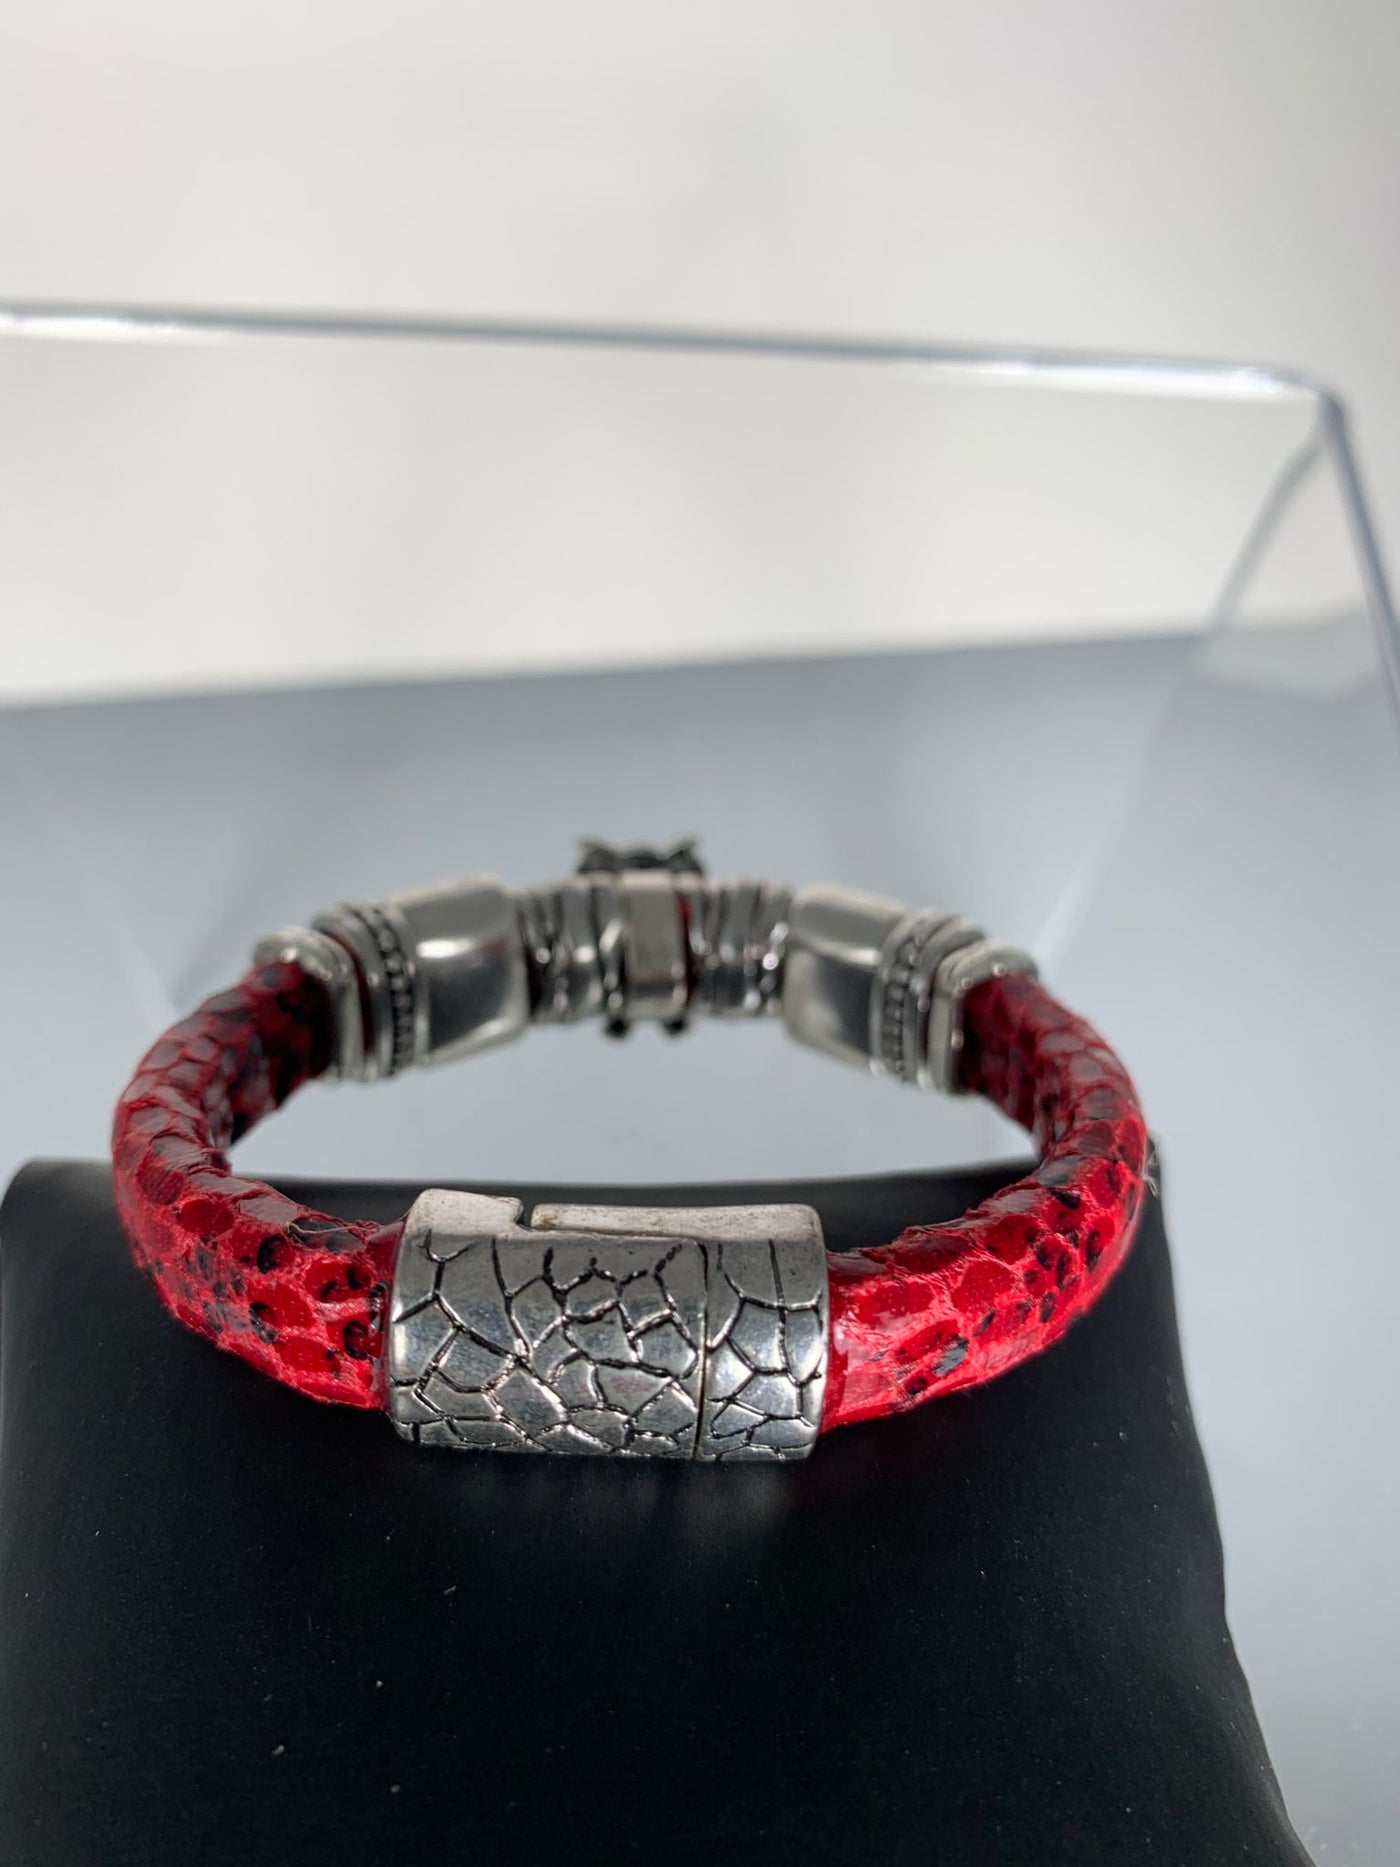 Red Faux Snake Skin Band Bracelet Featuring a Wise Owl